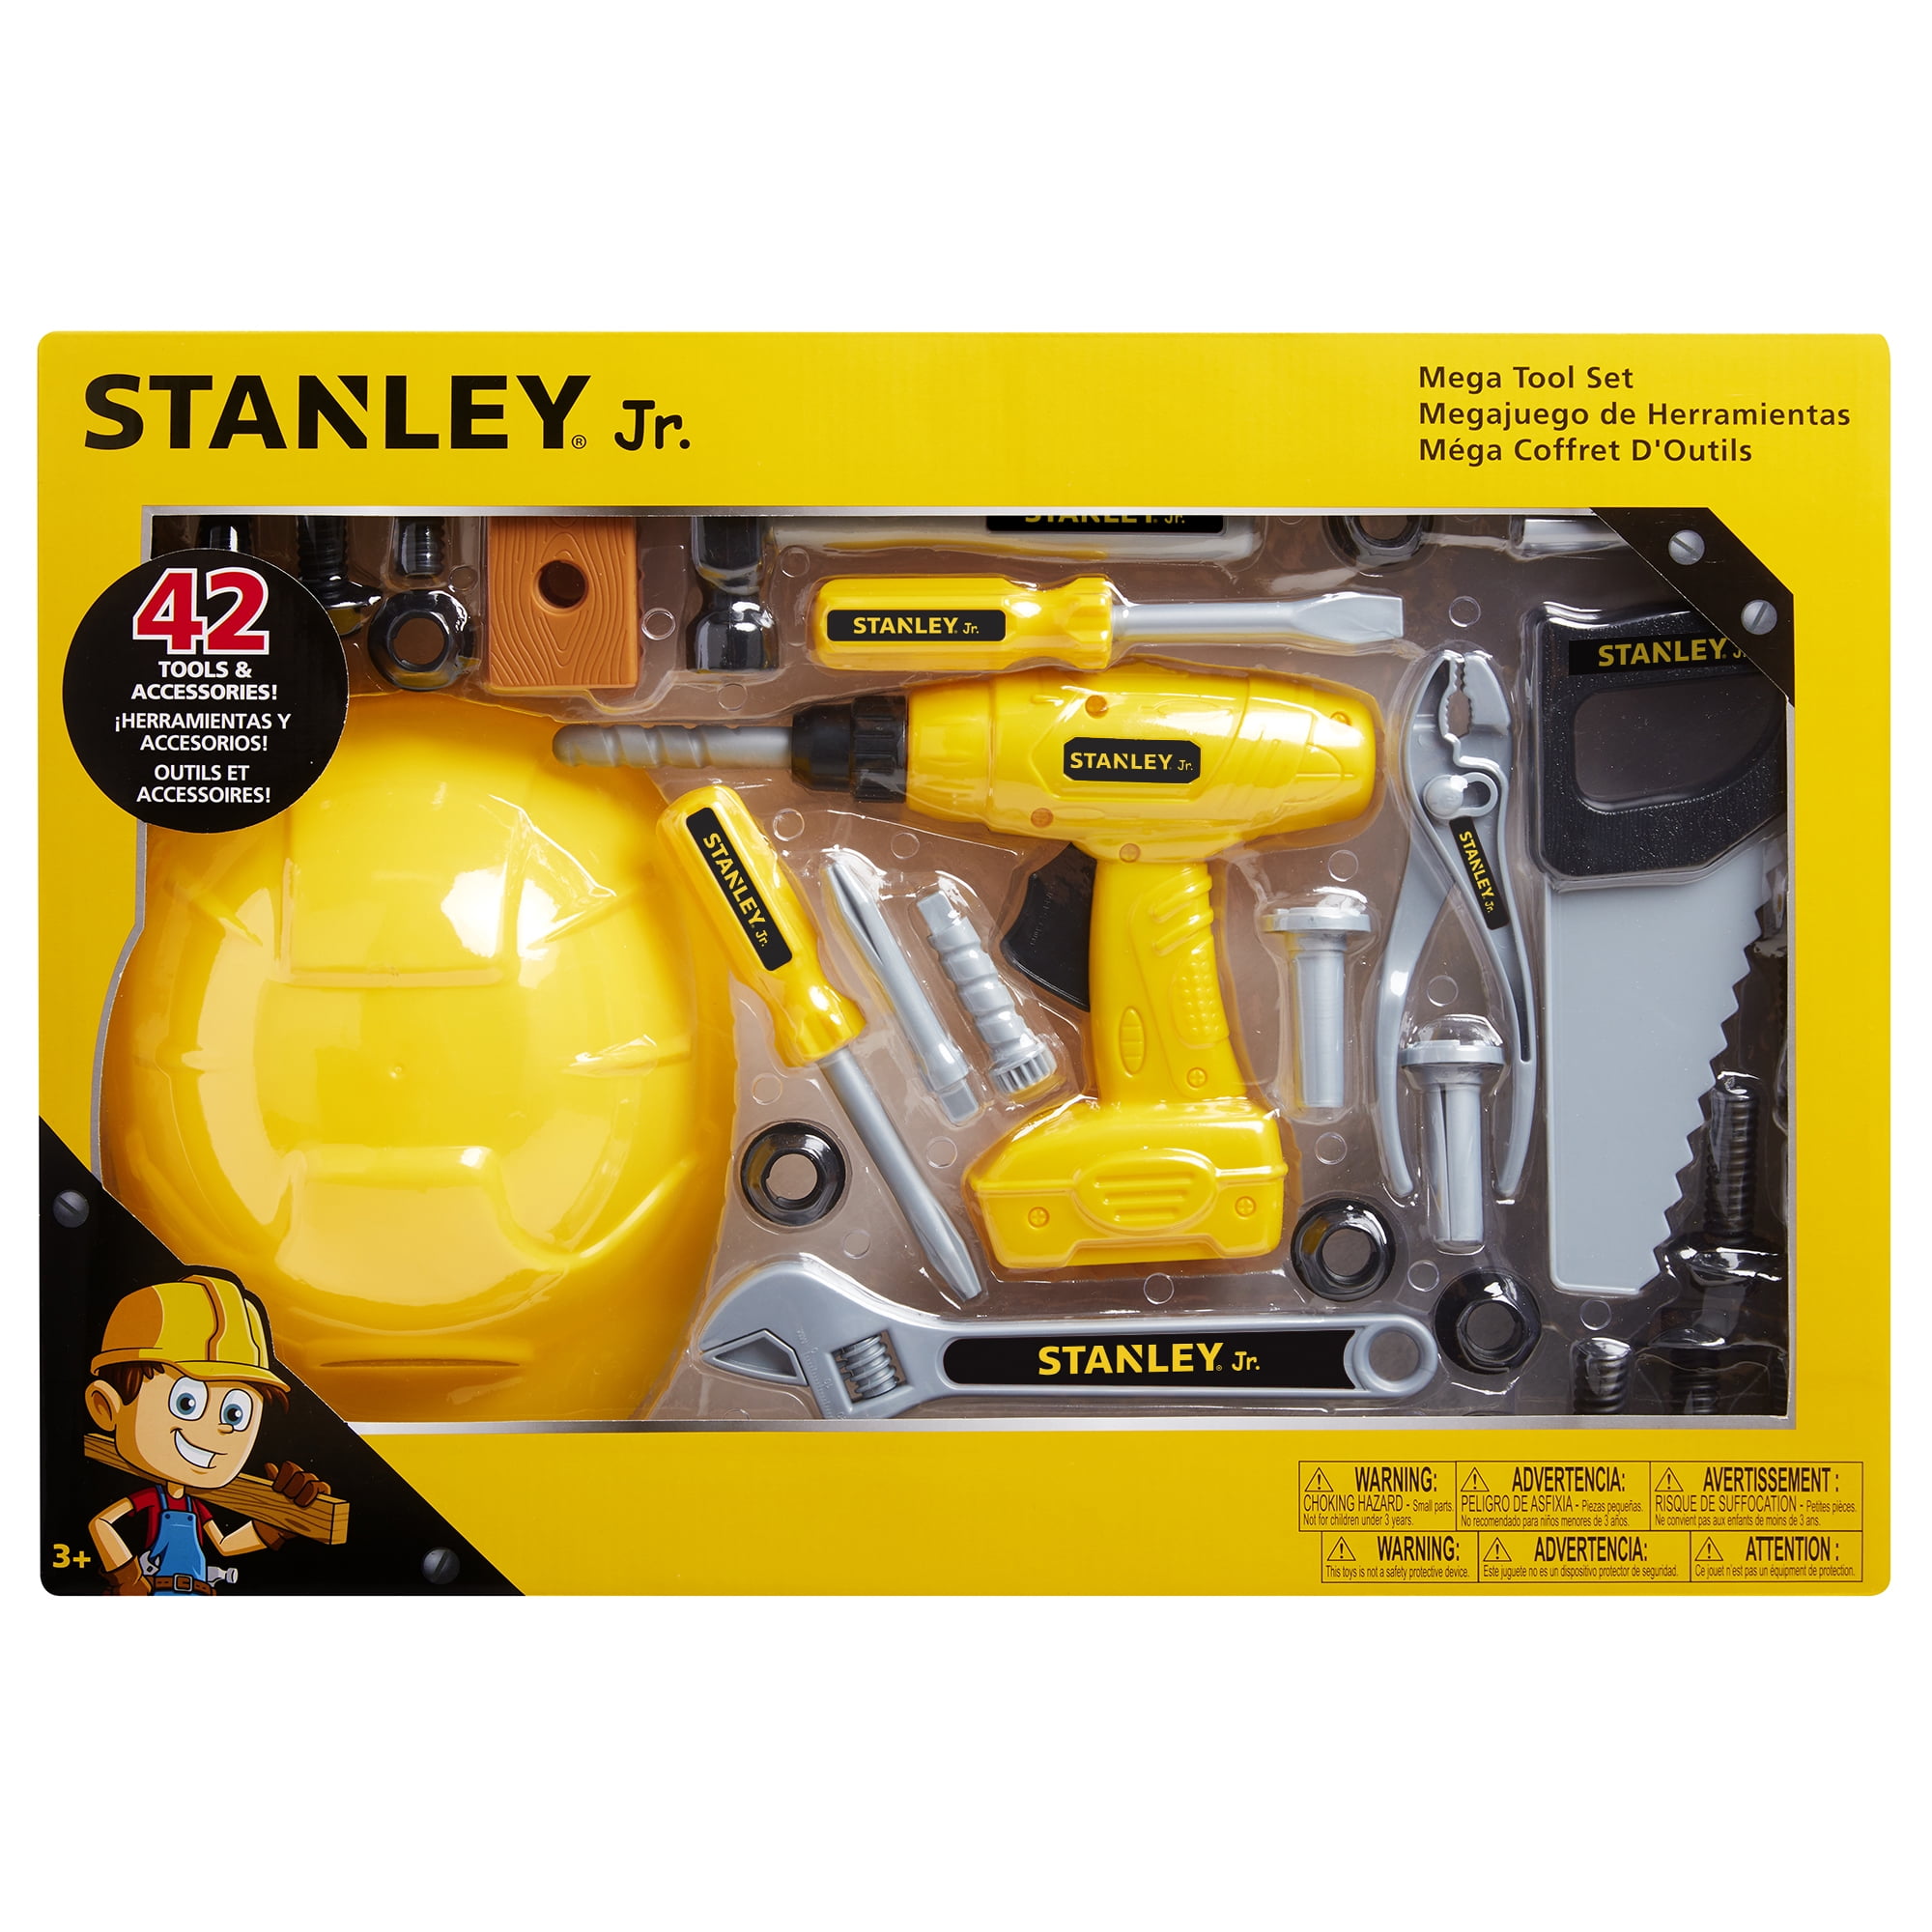 Stanley Jr. Toy Tools REPLACEMENT Kid Toy Tools Pretend Play. Pre Owned